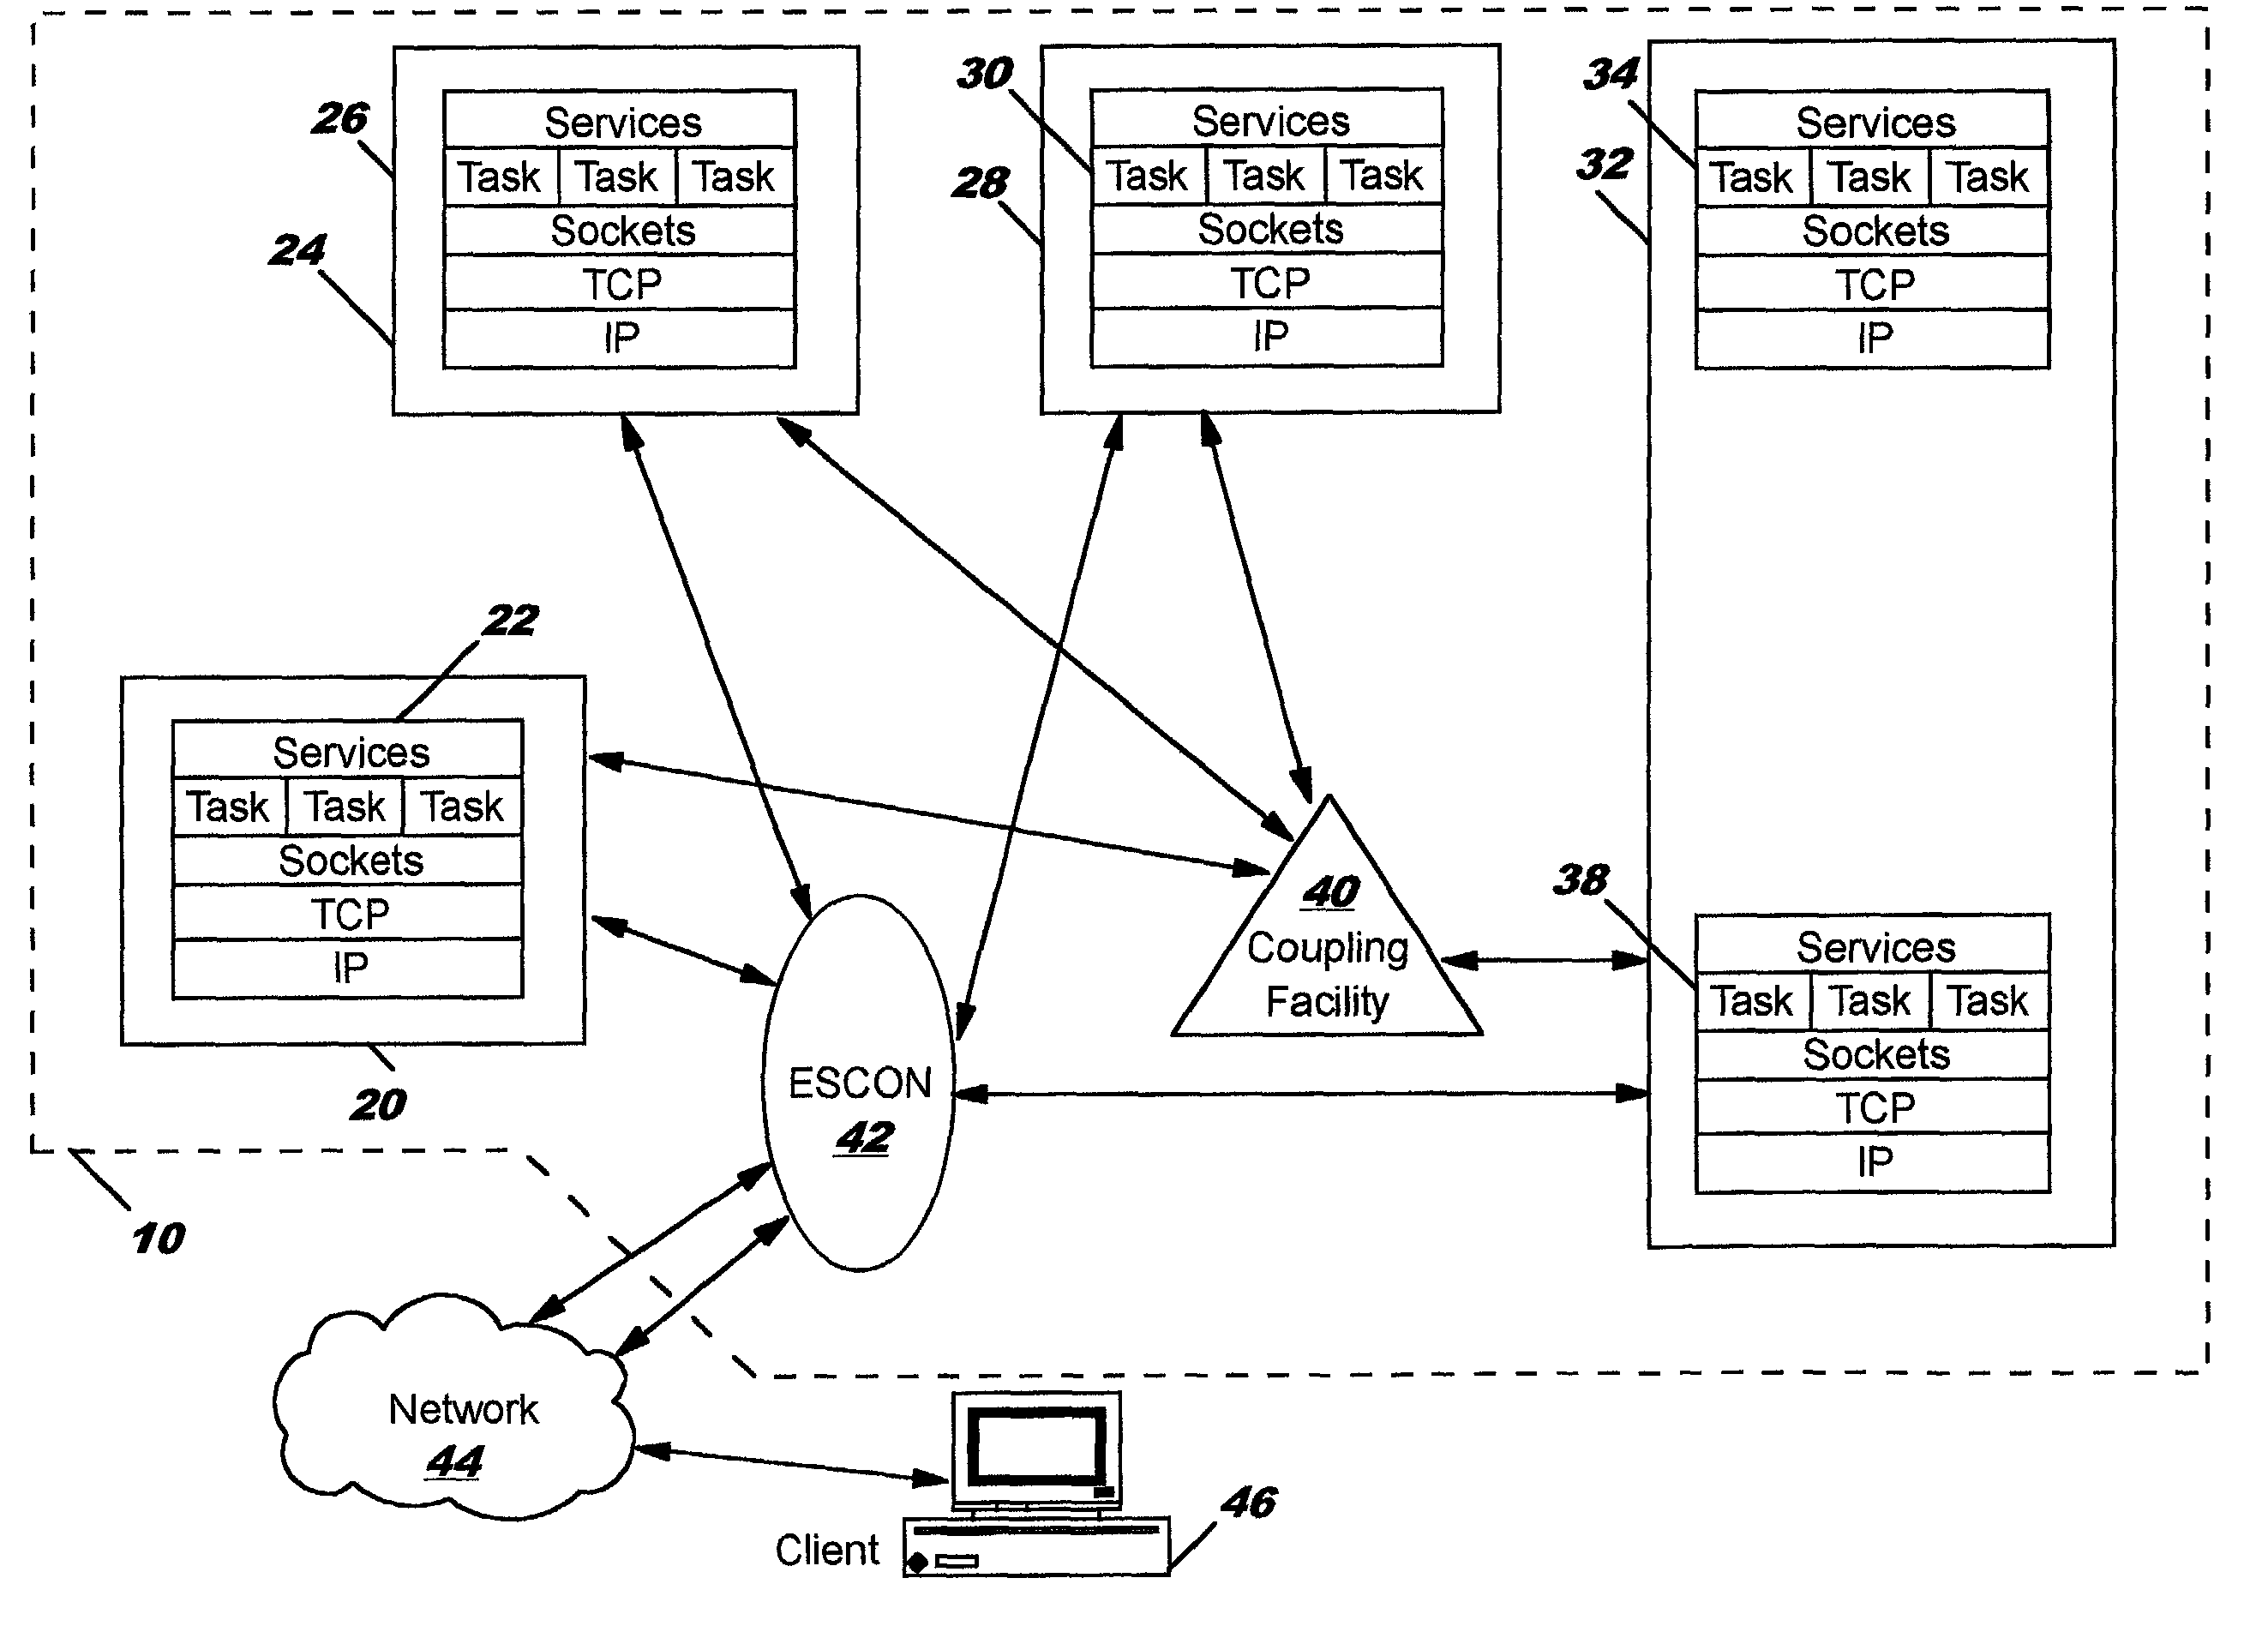 Server application initiated affinity within networks performing workload balancing